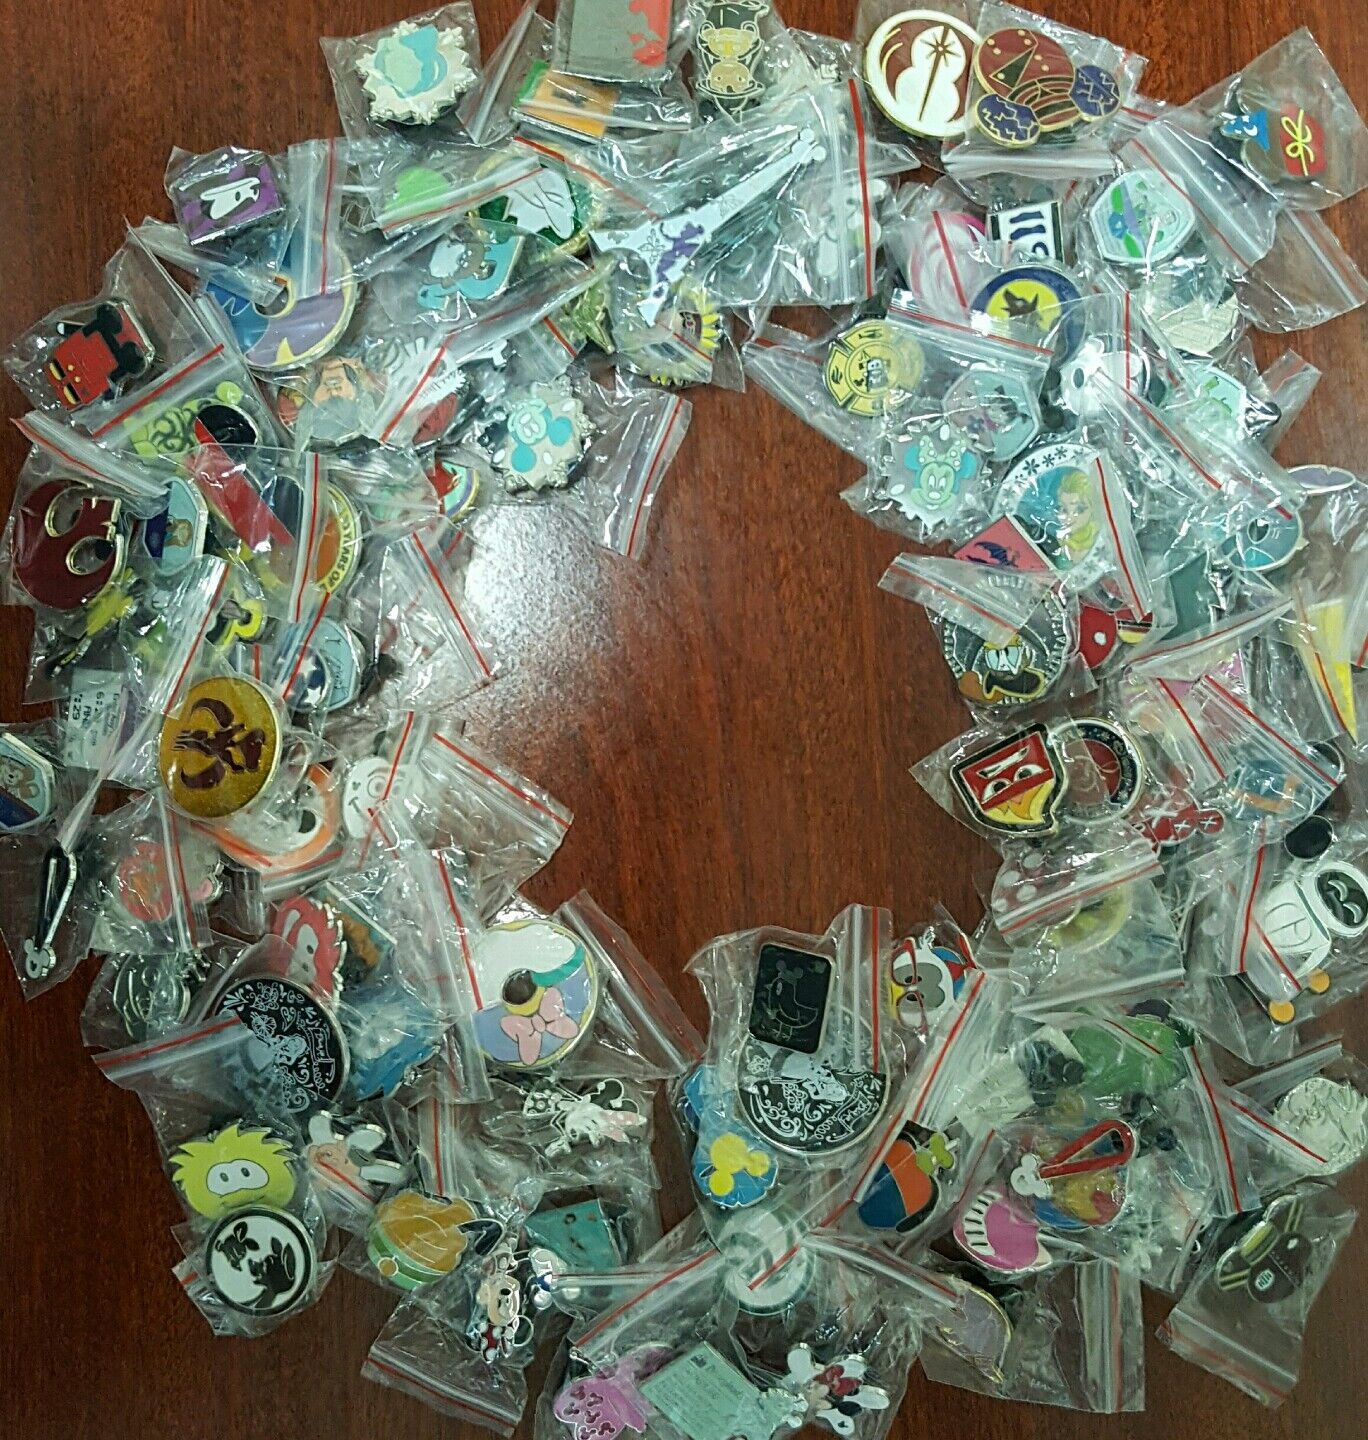 Disney Trading Pins 100 lot 1-3 Day Shipping 100% tradable no doubles